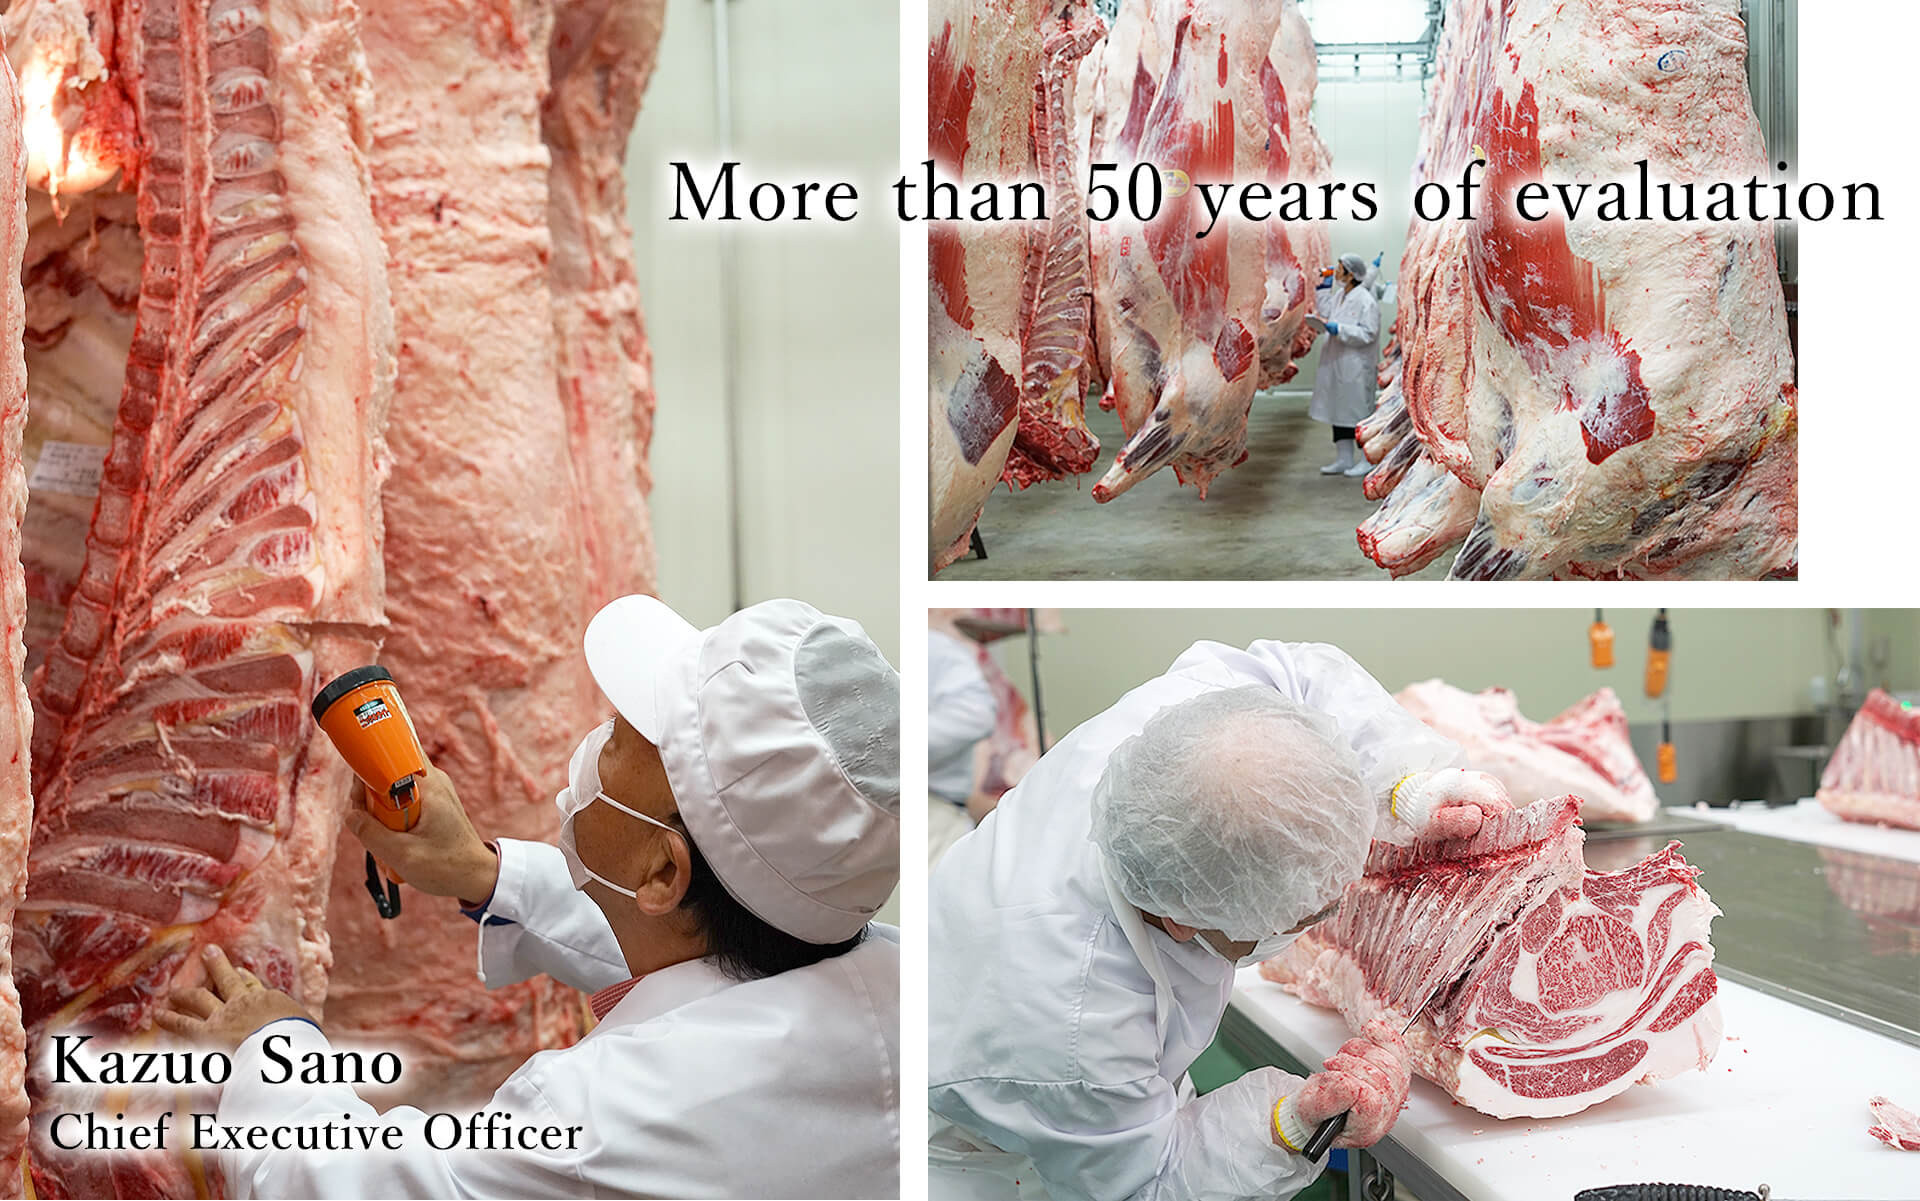 How we have been evaluating beef for more than 50 years